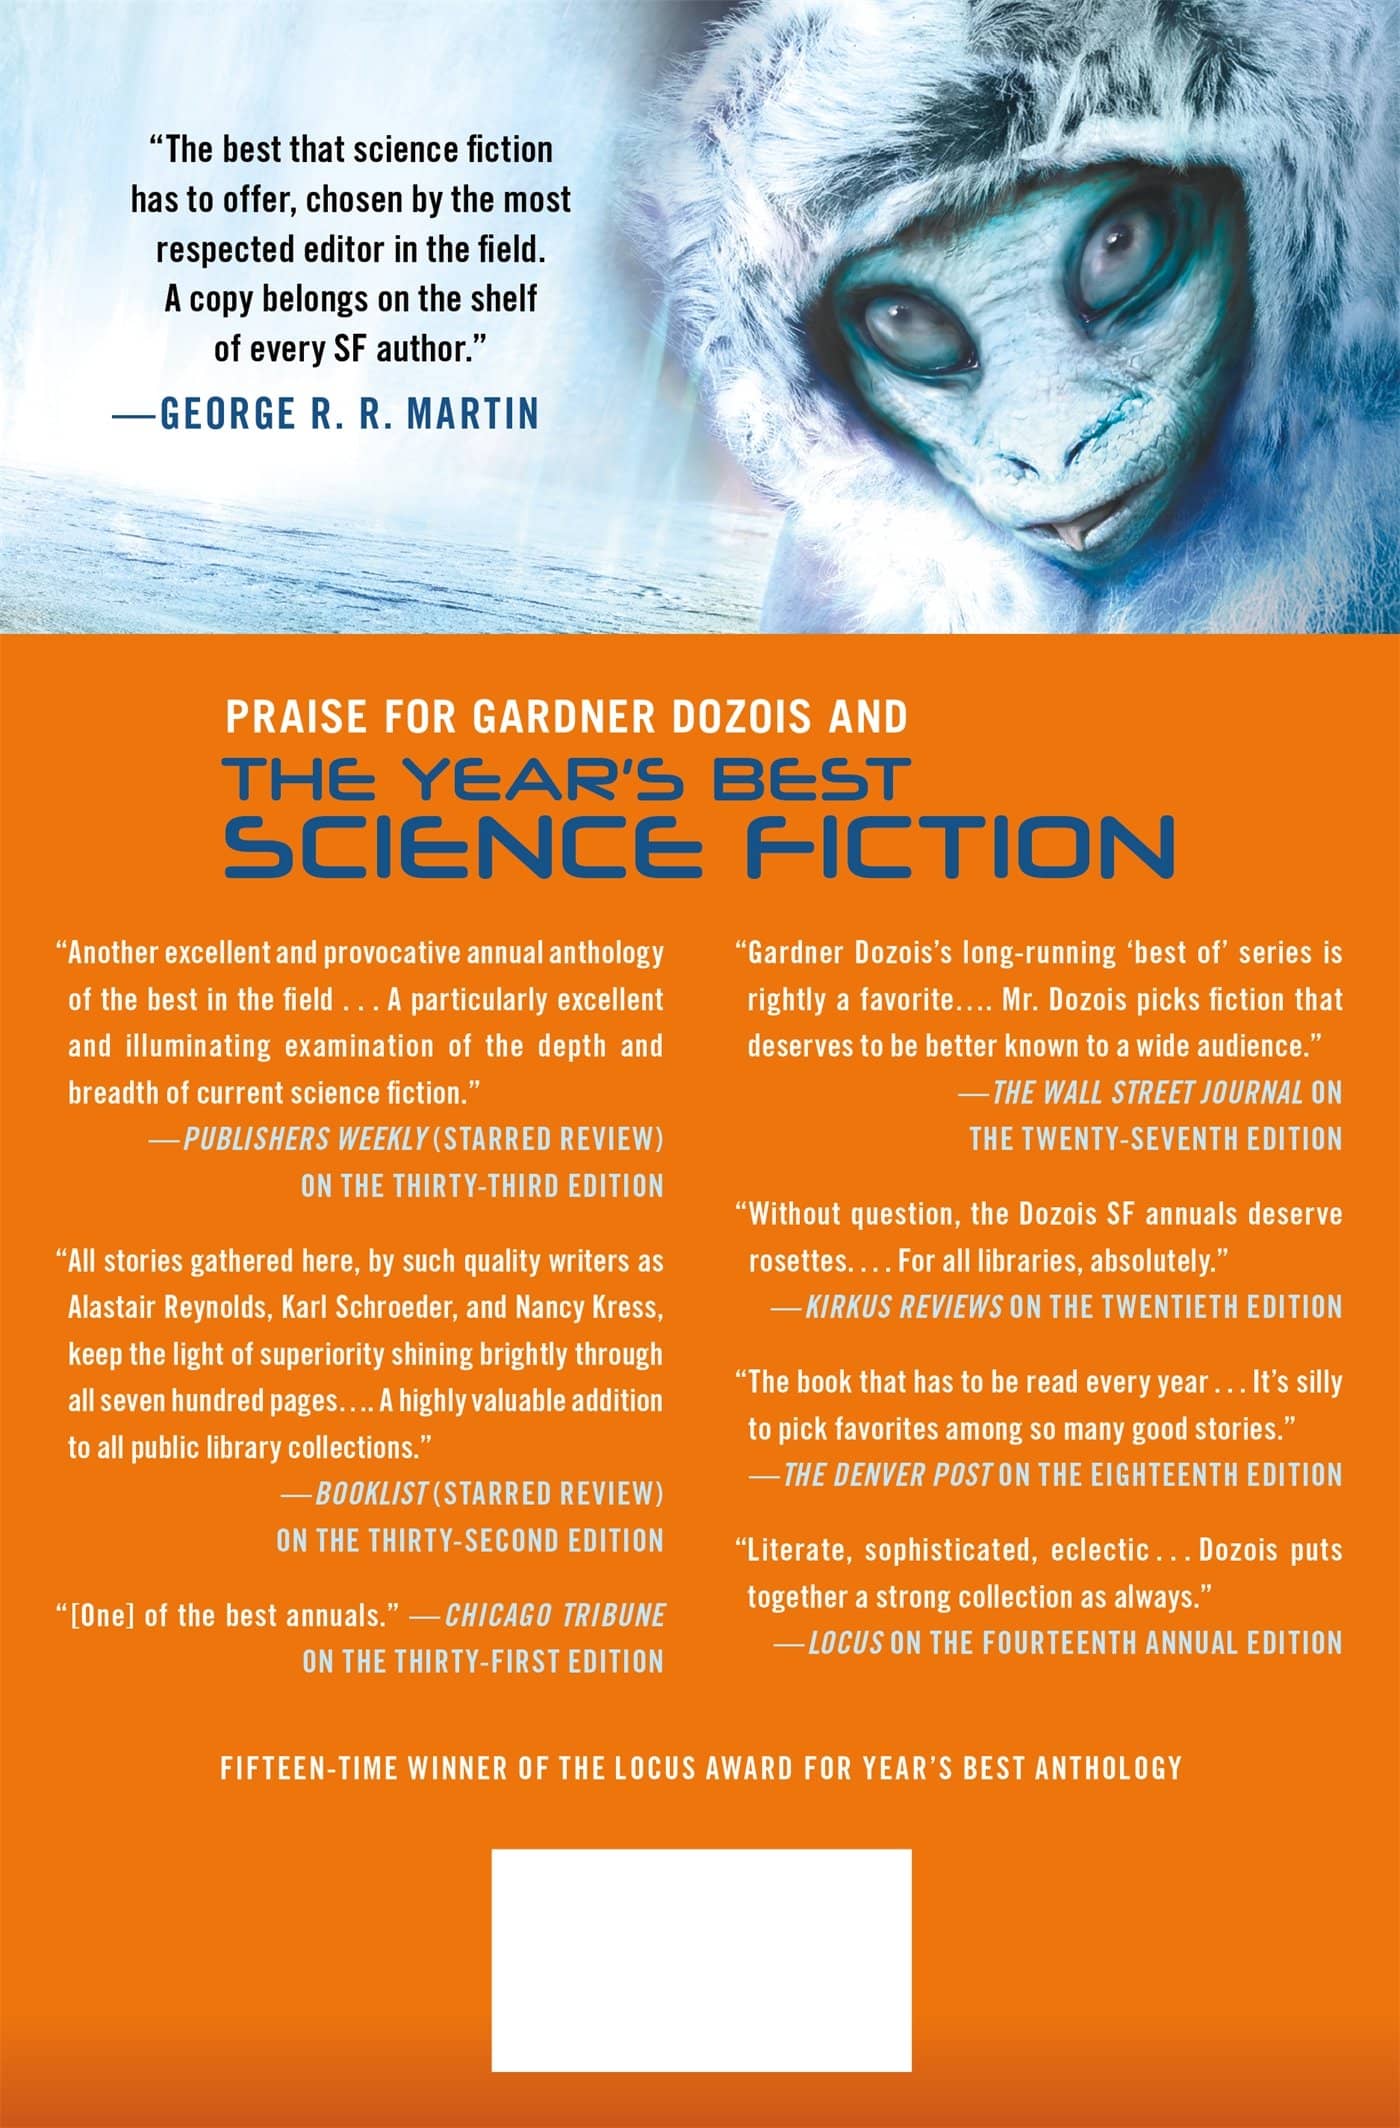 The Fifth Science Fiction Megapack by Gardner Dozois